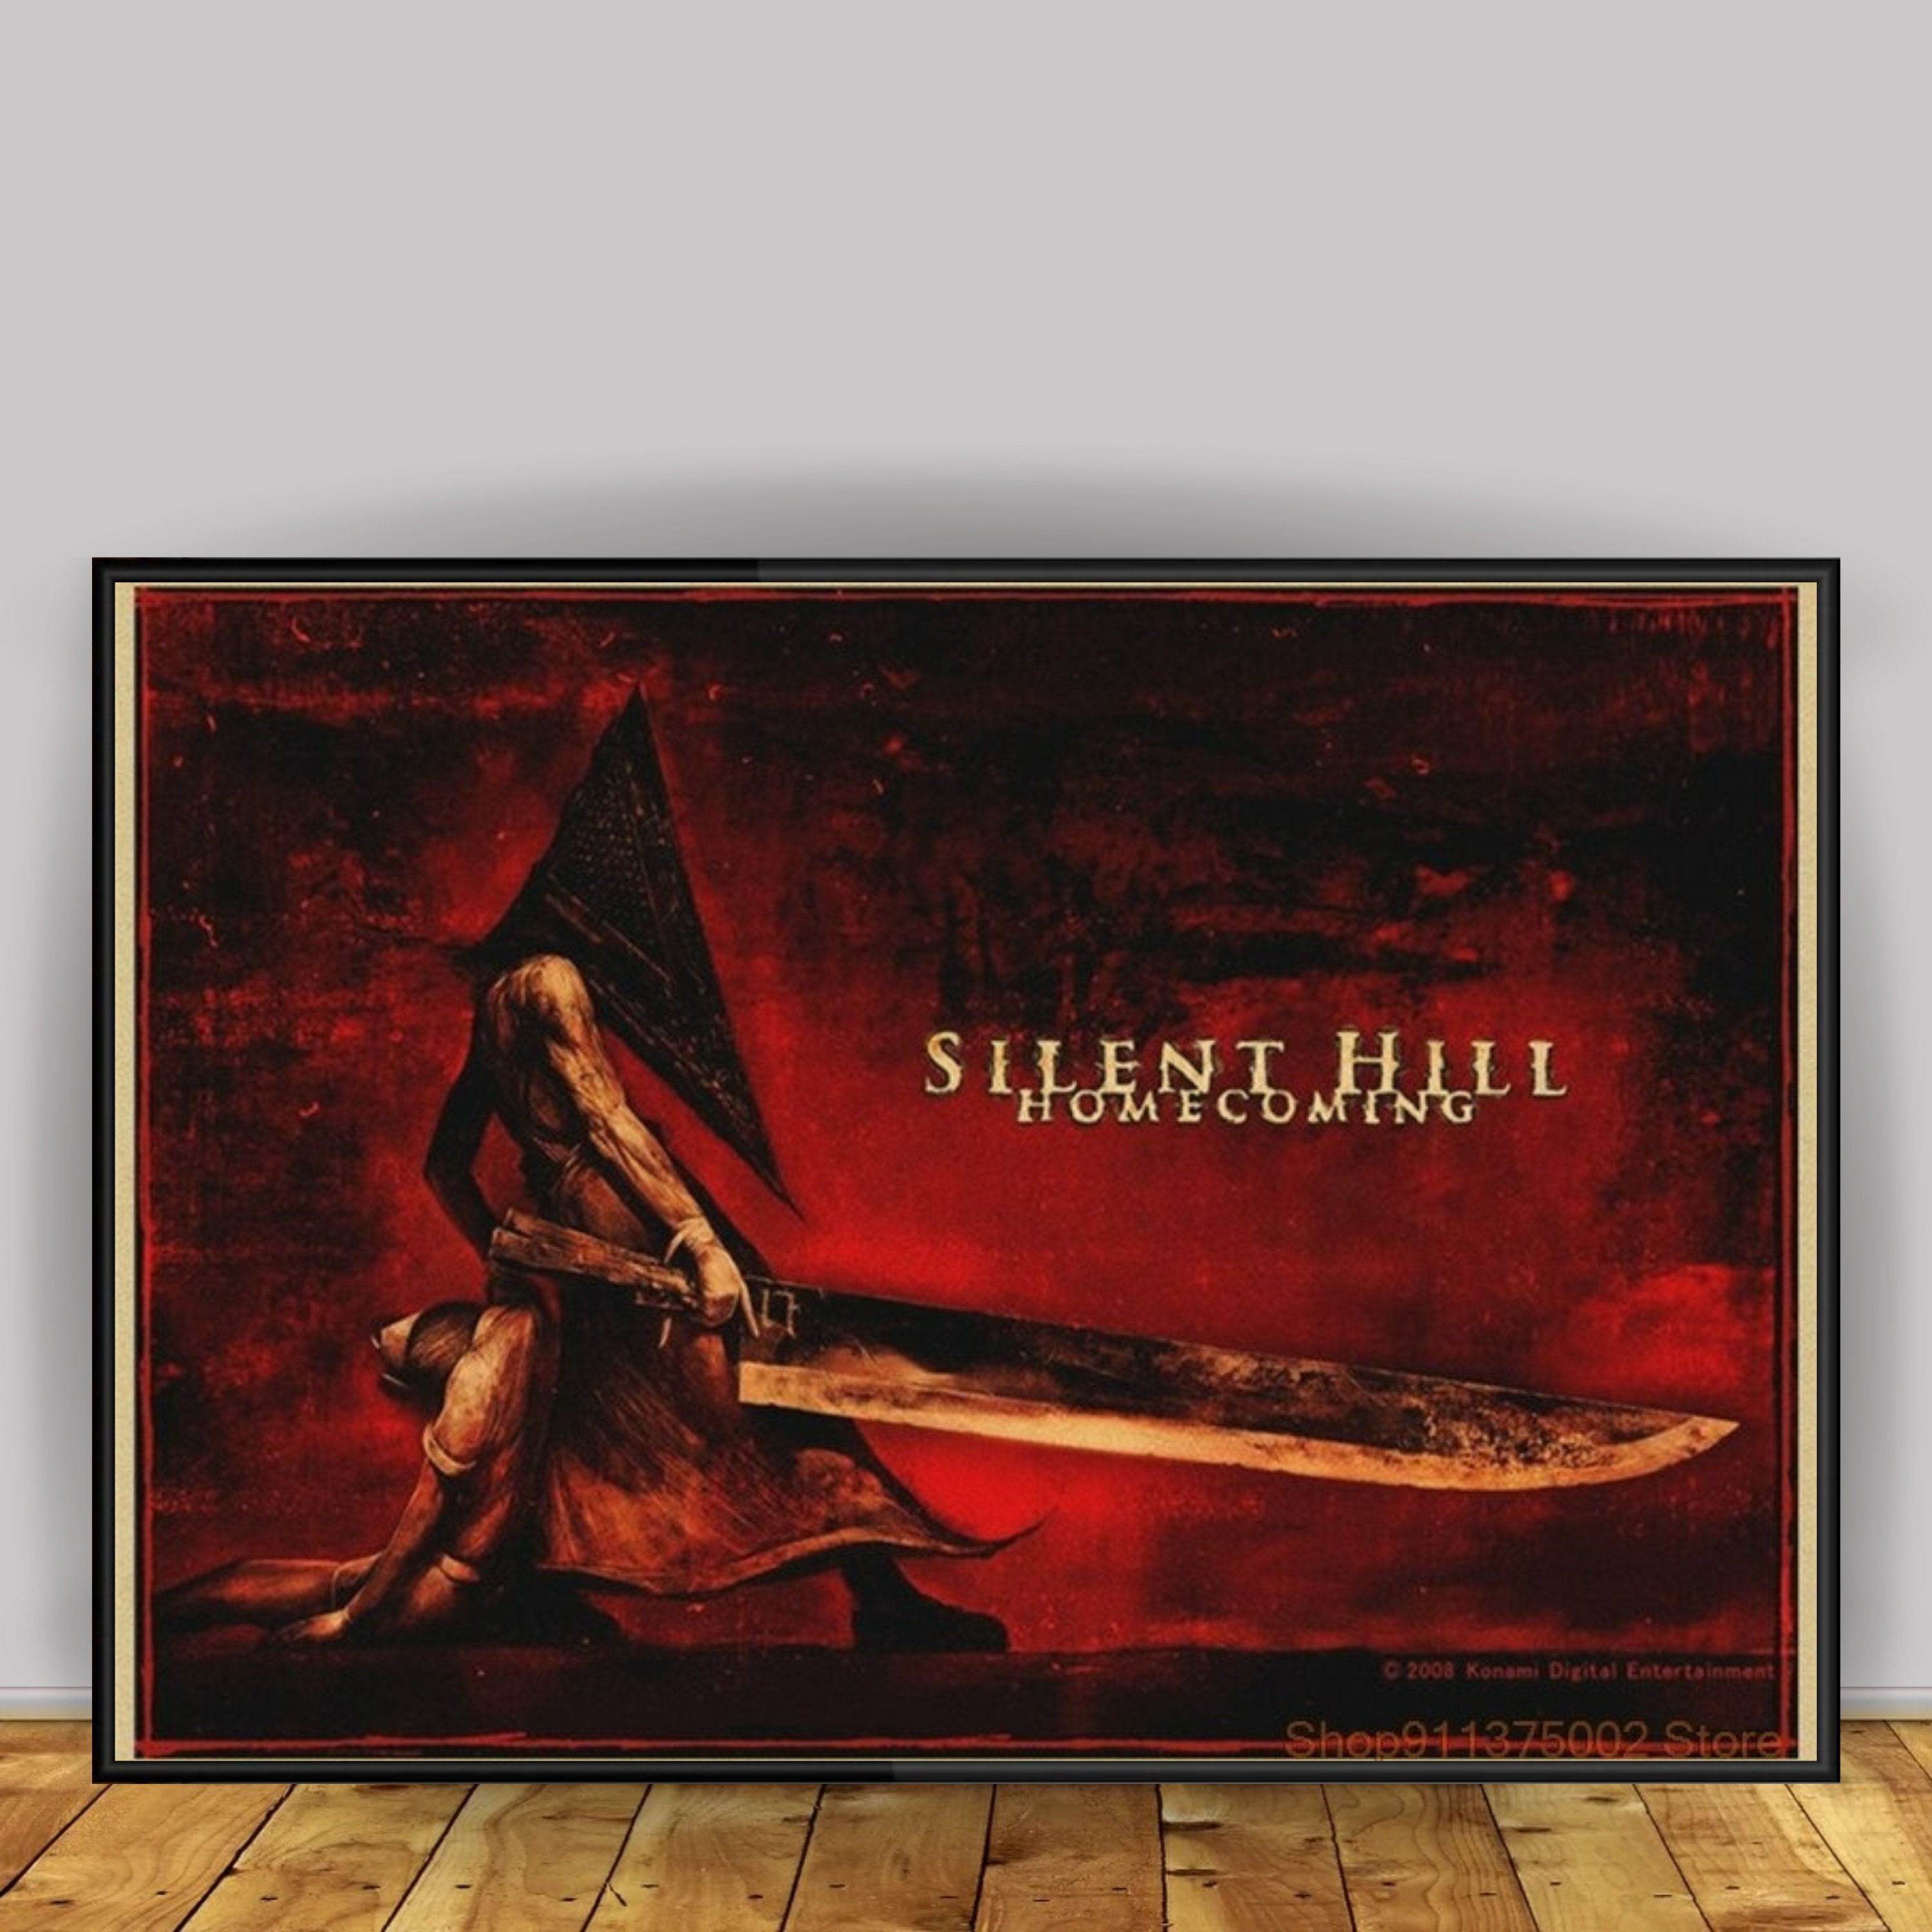 2008 SILENT HILL HOMECOMING Xbox PS3 Video Game = Promo Art Print AD /  POSTER